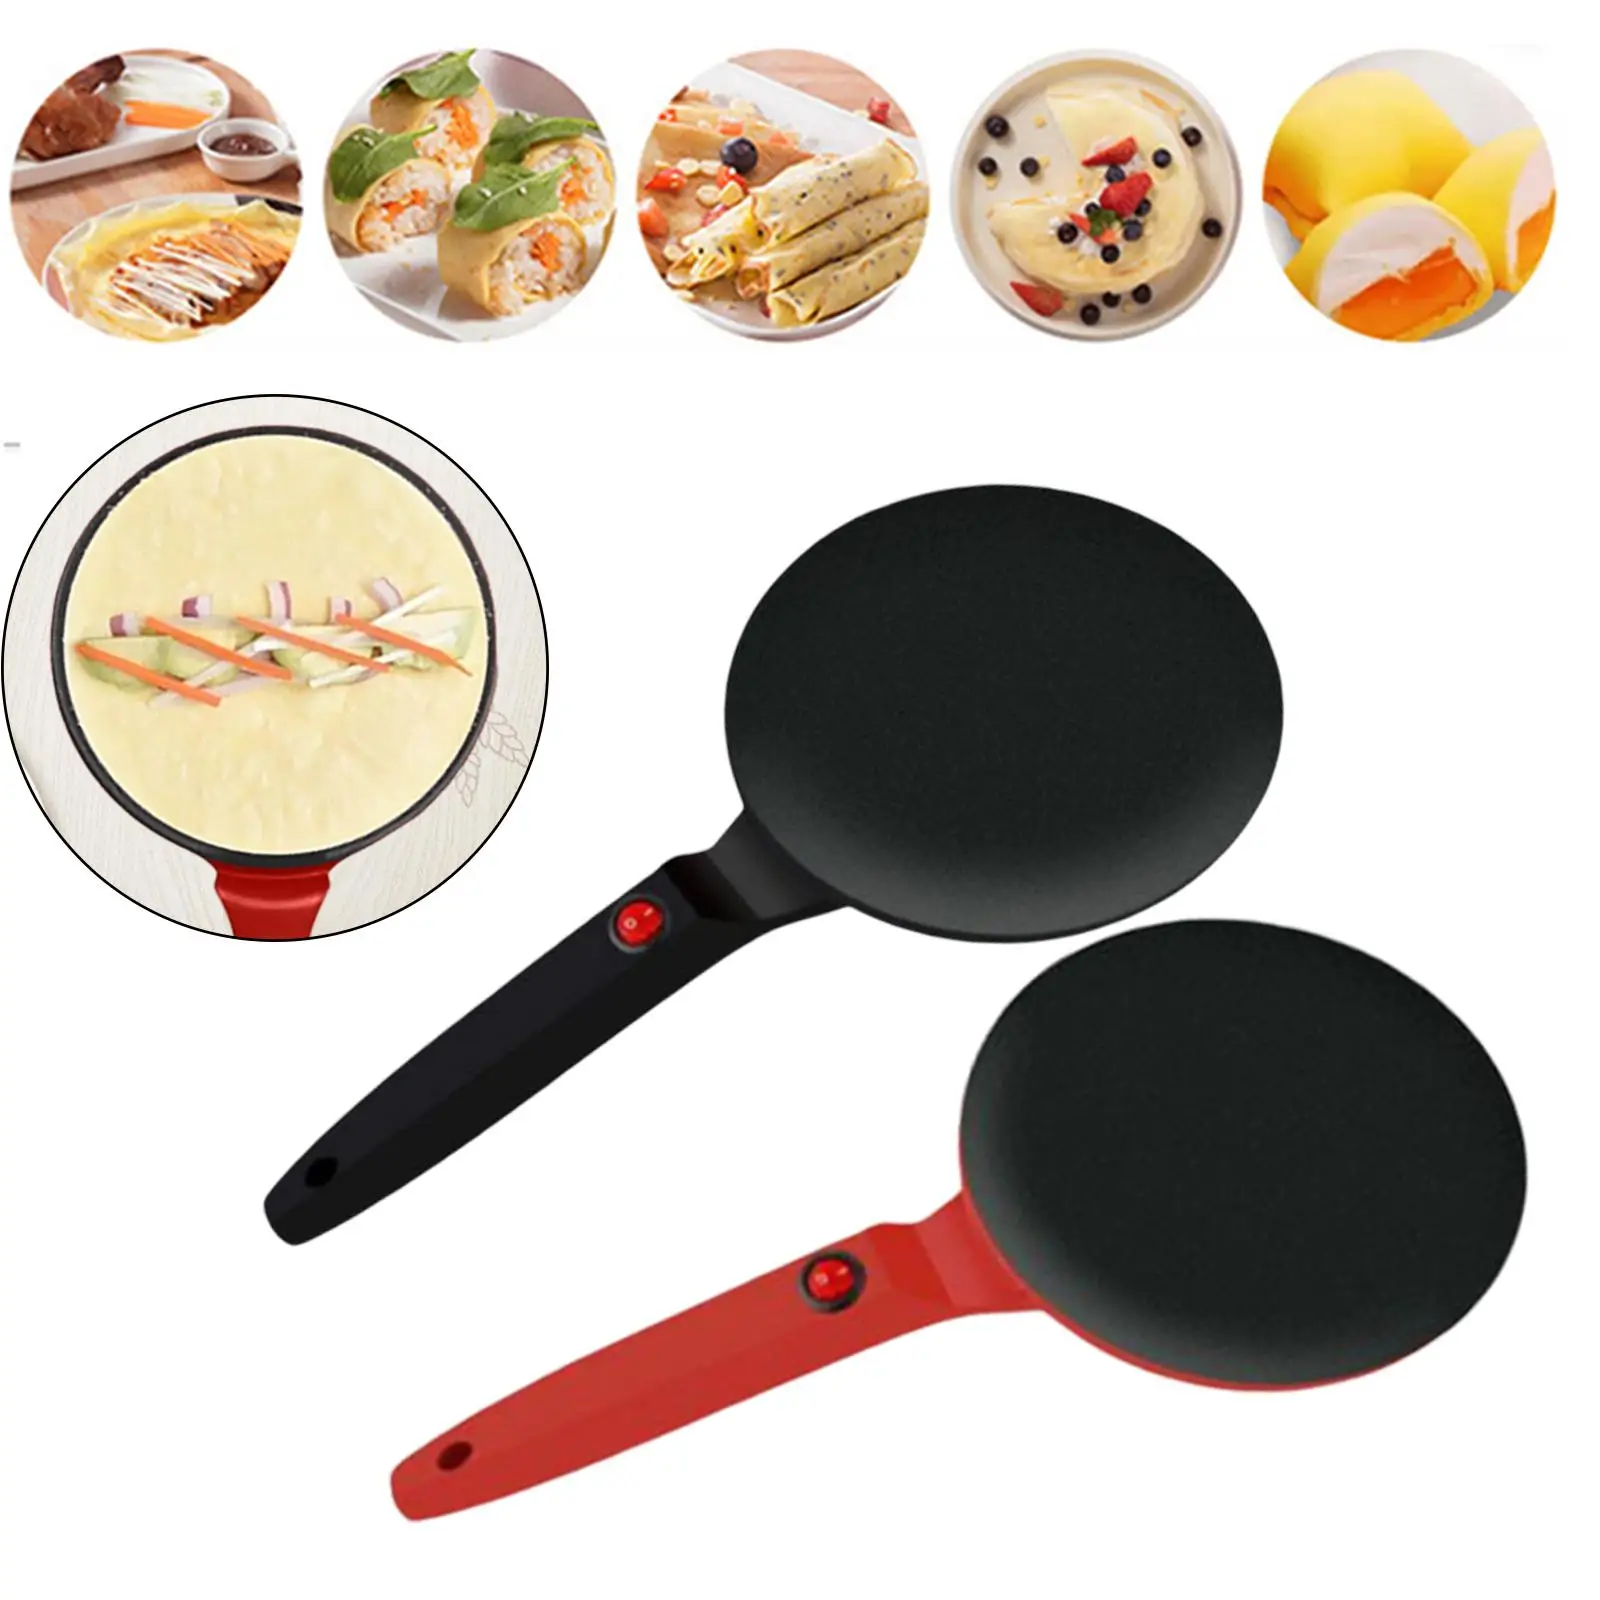 Kitchen Crepe Maker Non Stick Auto Temperature Control Easy to Use Eggs Breakfast Cake Pan 220V for Household Bacon Crepes